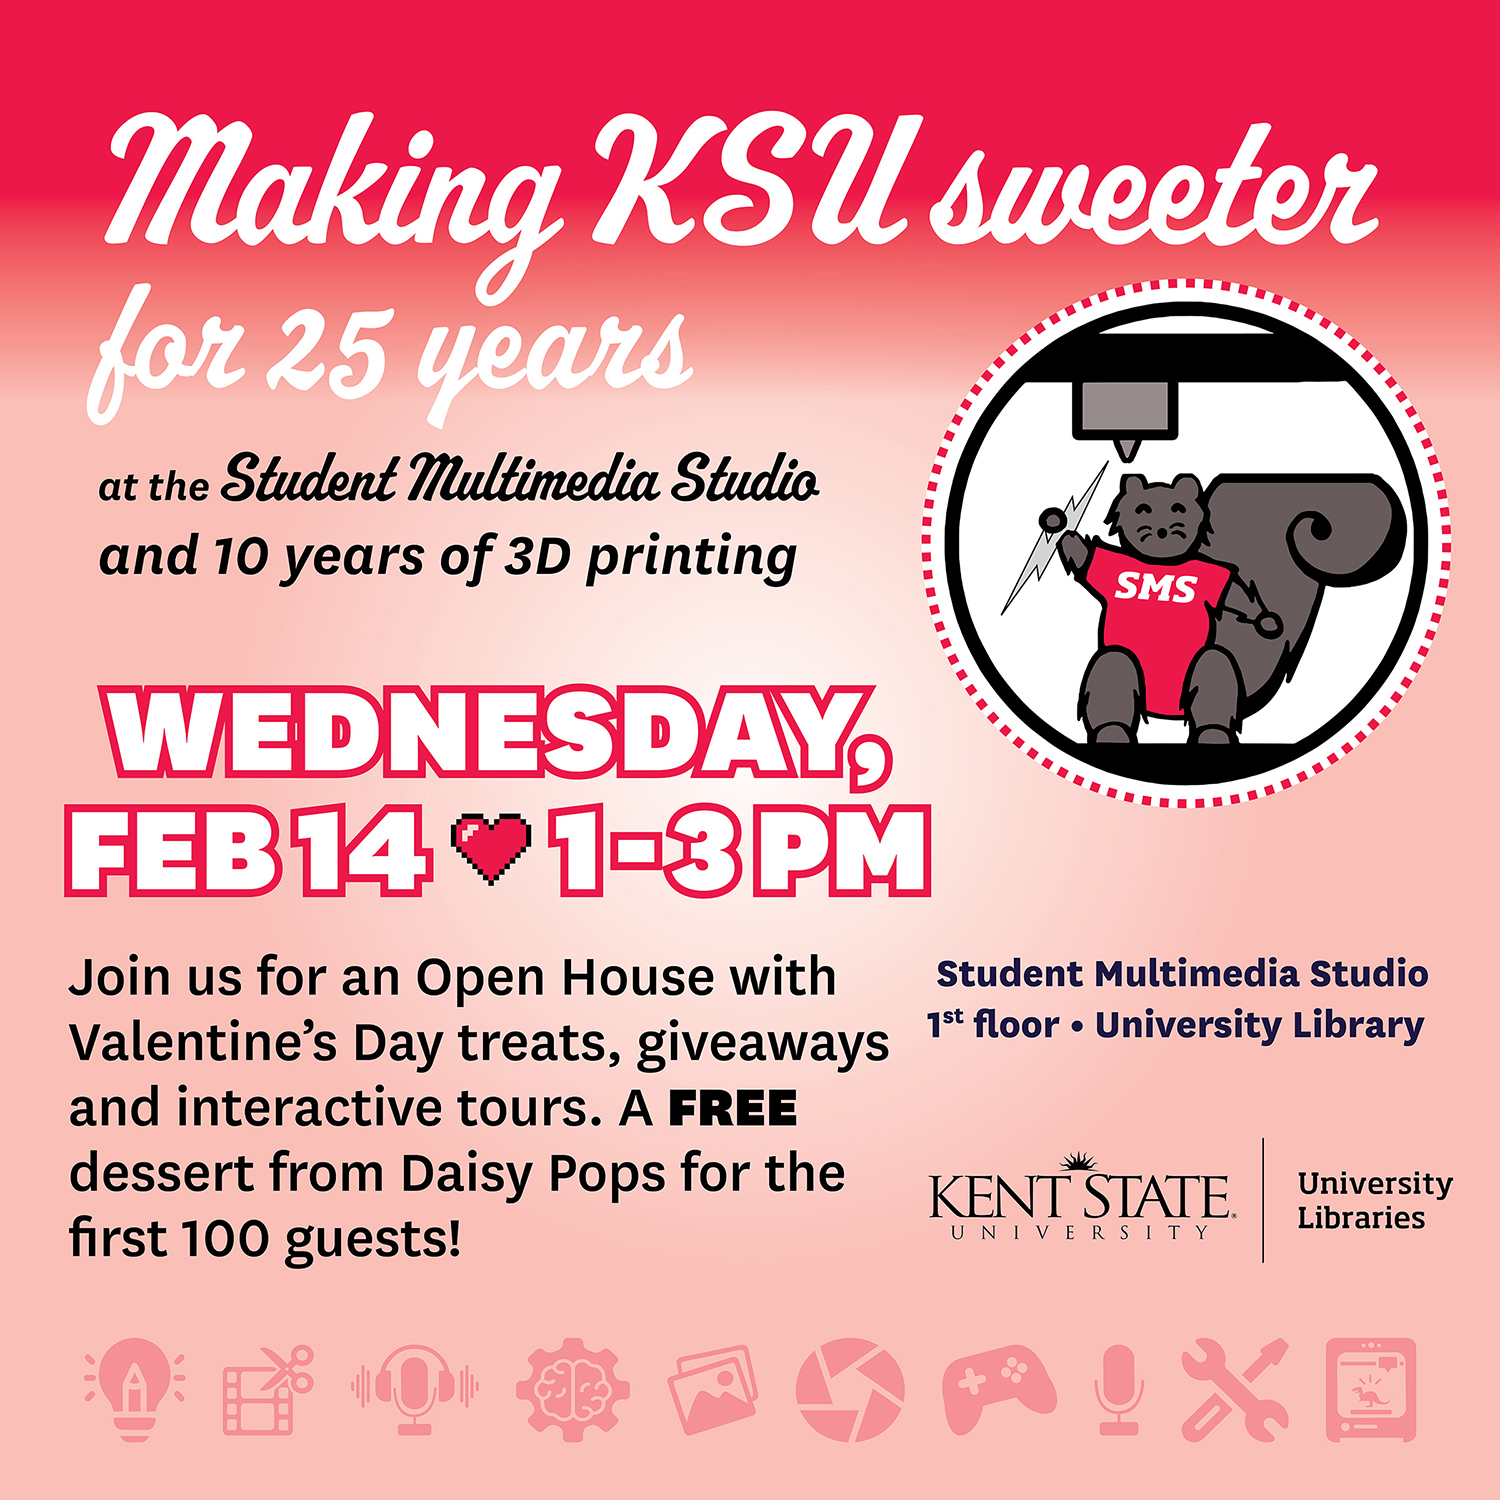 Celebrate 25 years of the SMS with an Open House on Valentine's Day